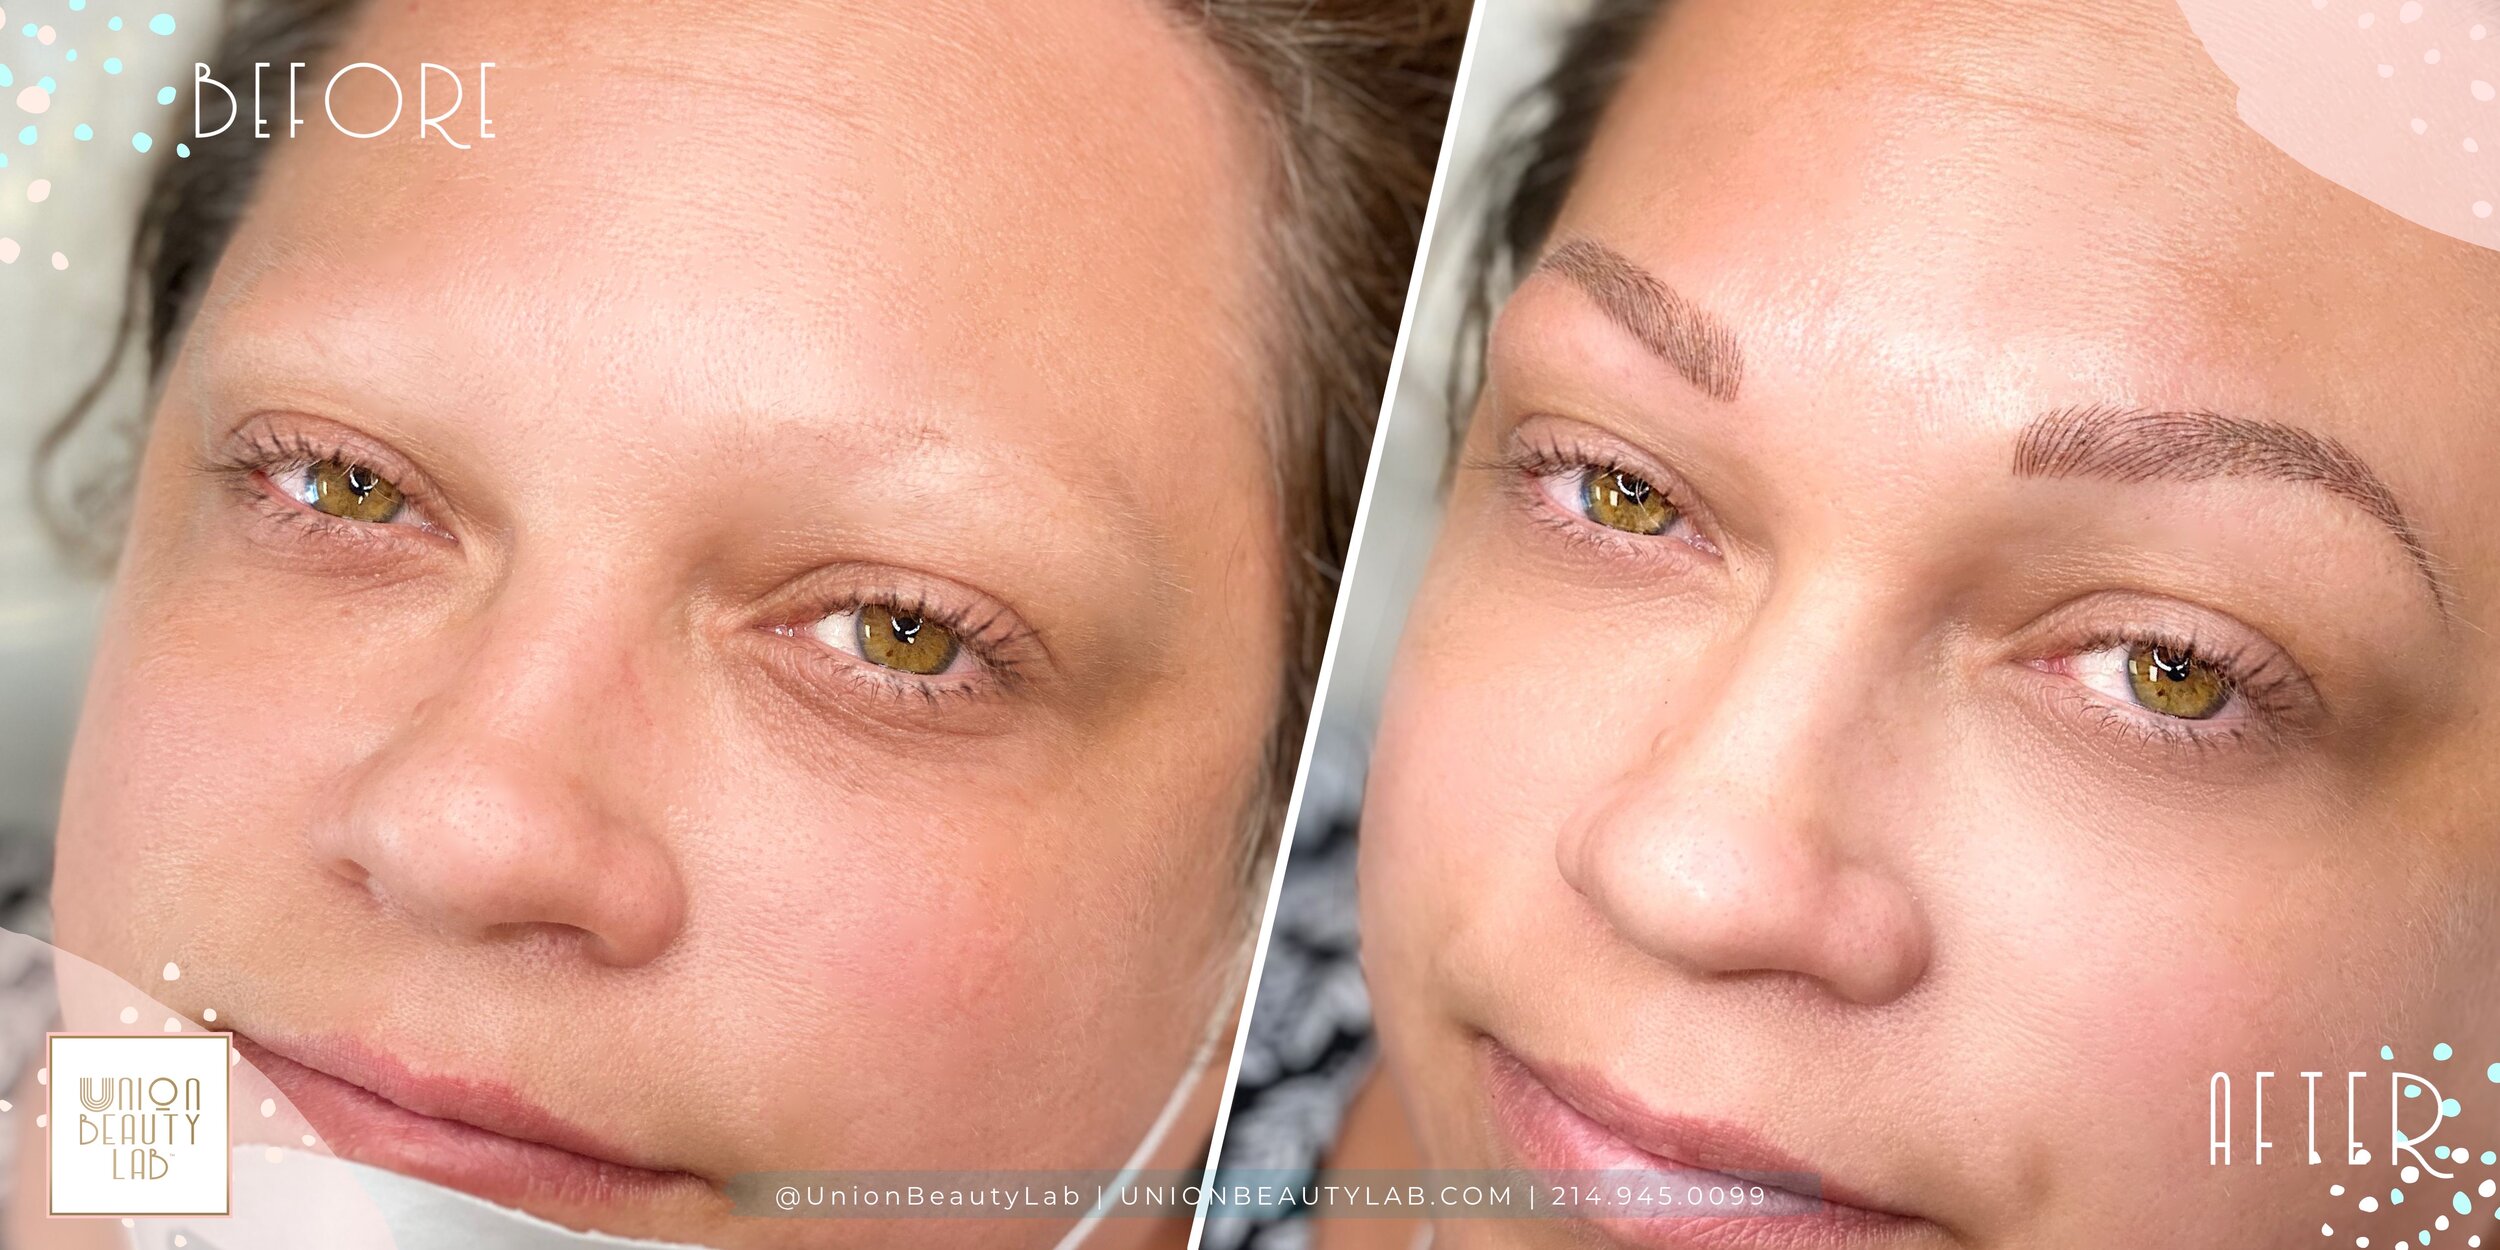 2149450099 Union Beauty Lab Advanced Microblading Cosmetic Tattooing Dallas Brunette 7.JPG